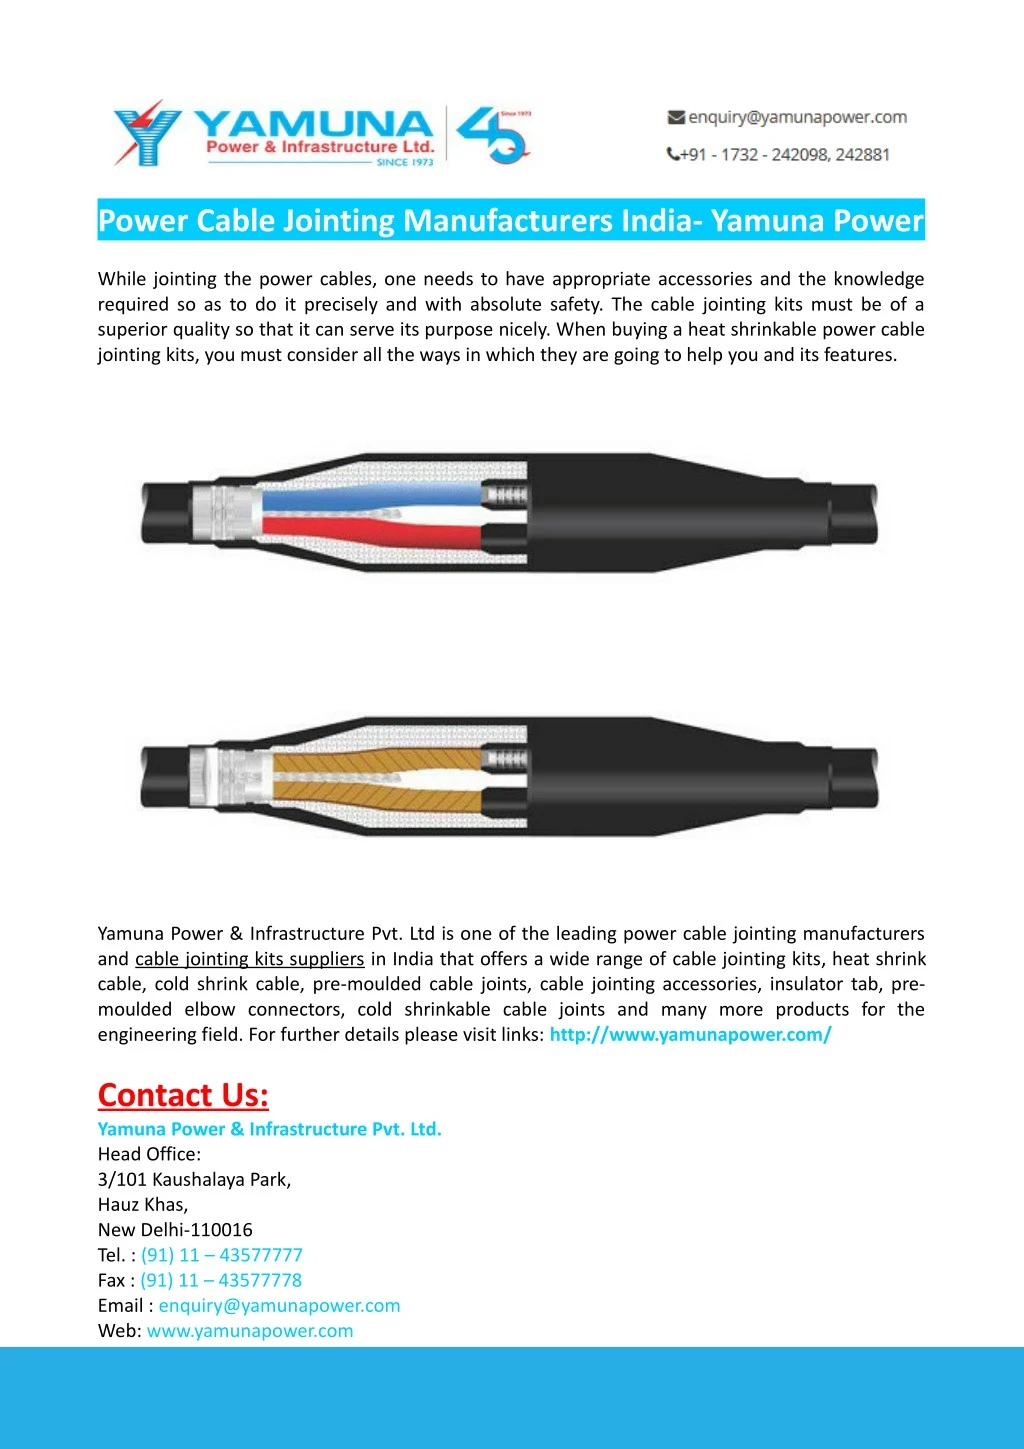 power cable jointing manufacturers india yamuna